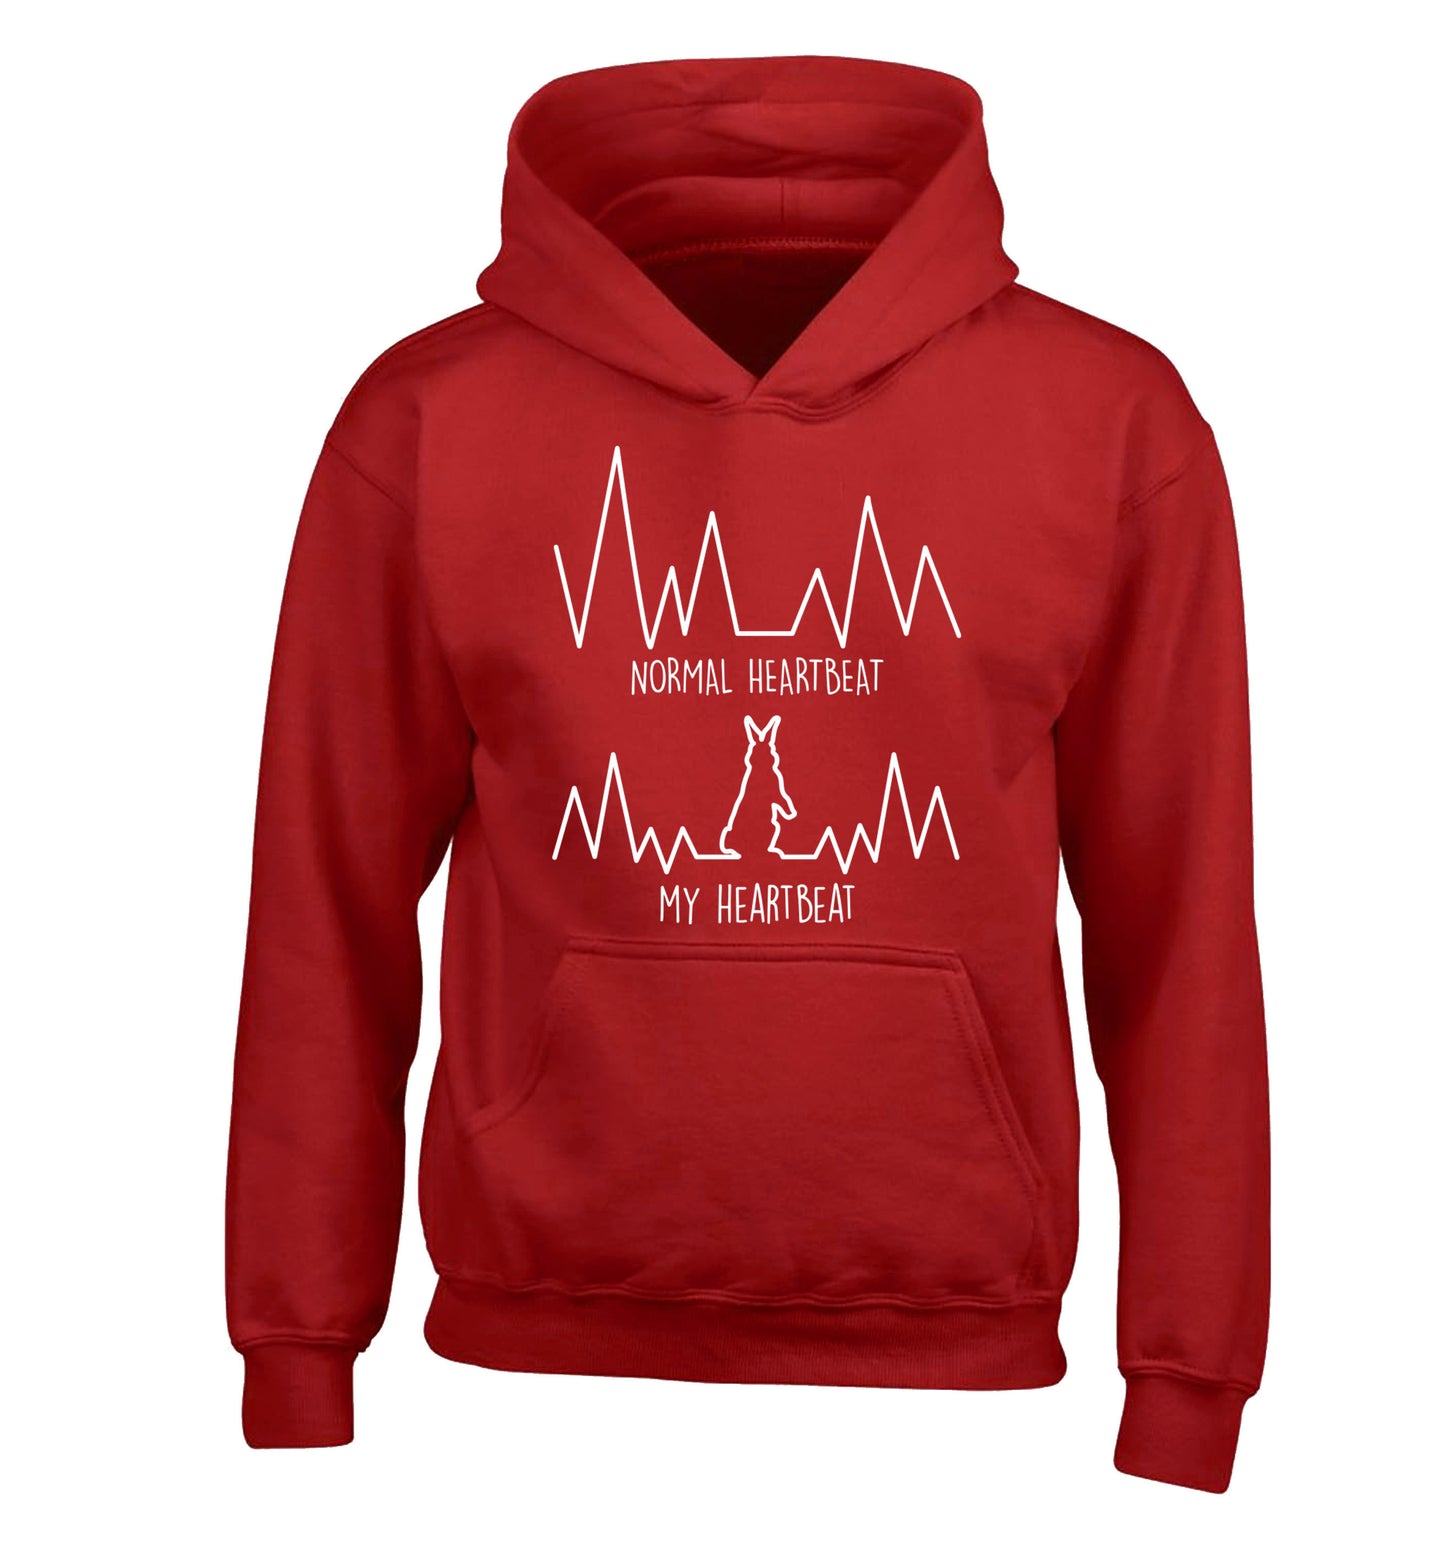 Normal heartbeat, my heartbeat rabbit lover children's red hoodie 12-14 Years